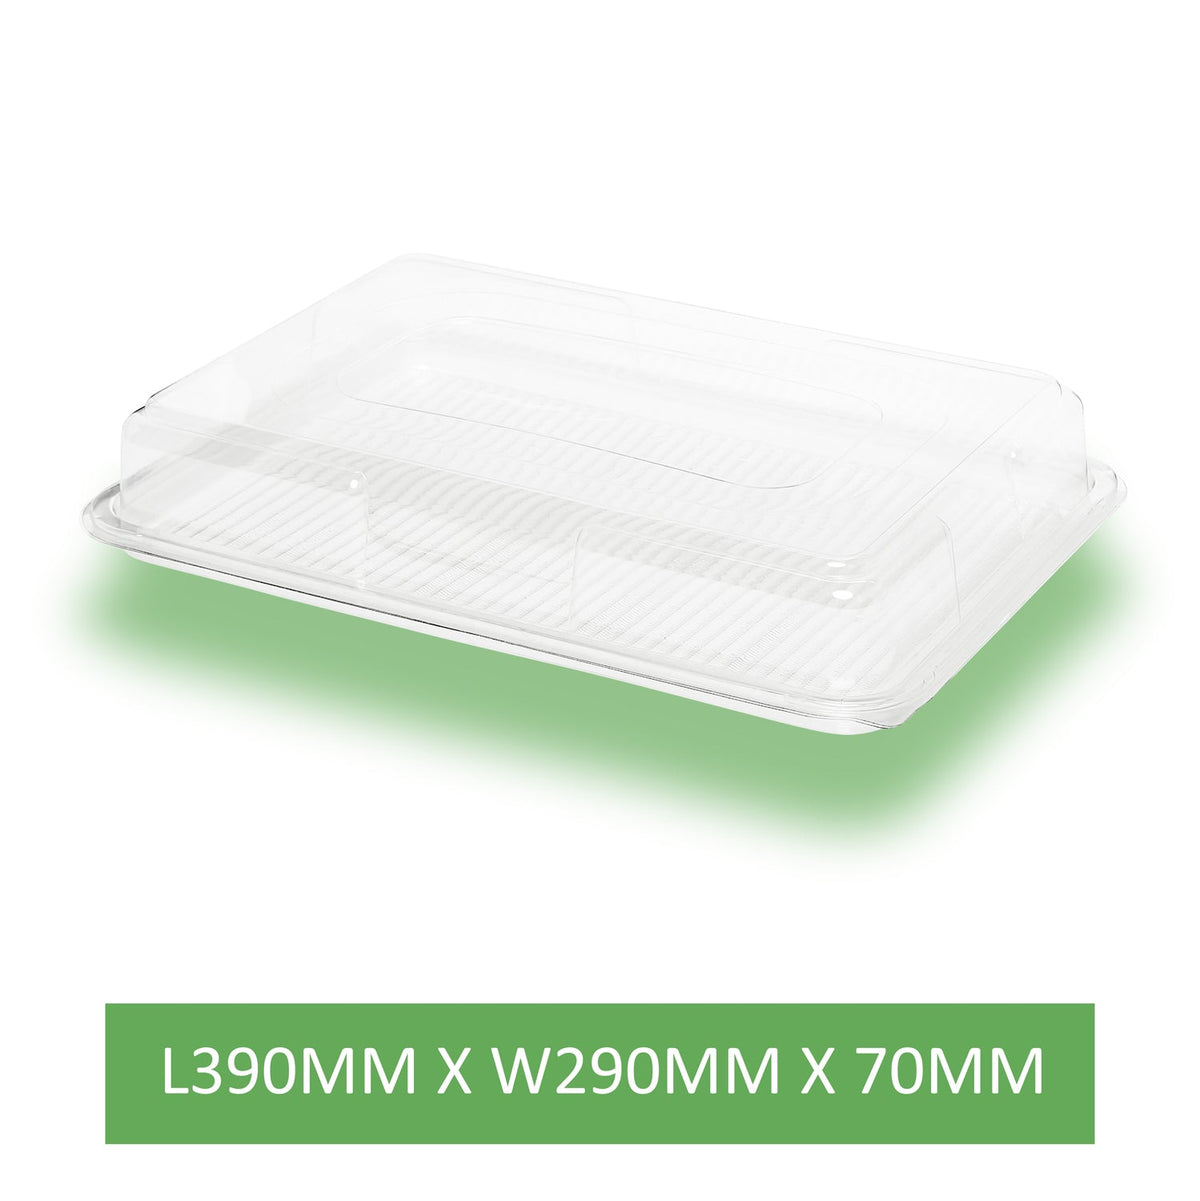 30 x Caterline Combi Clear Base Sandwich Platters with Lids (10 Large, 10 Medium, 10 Small)